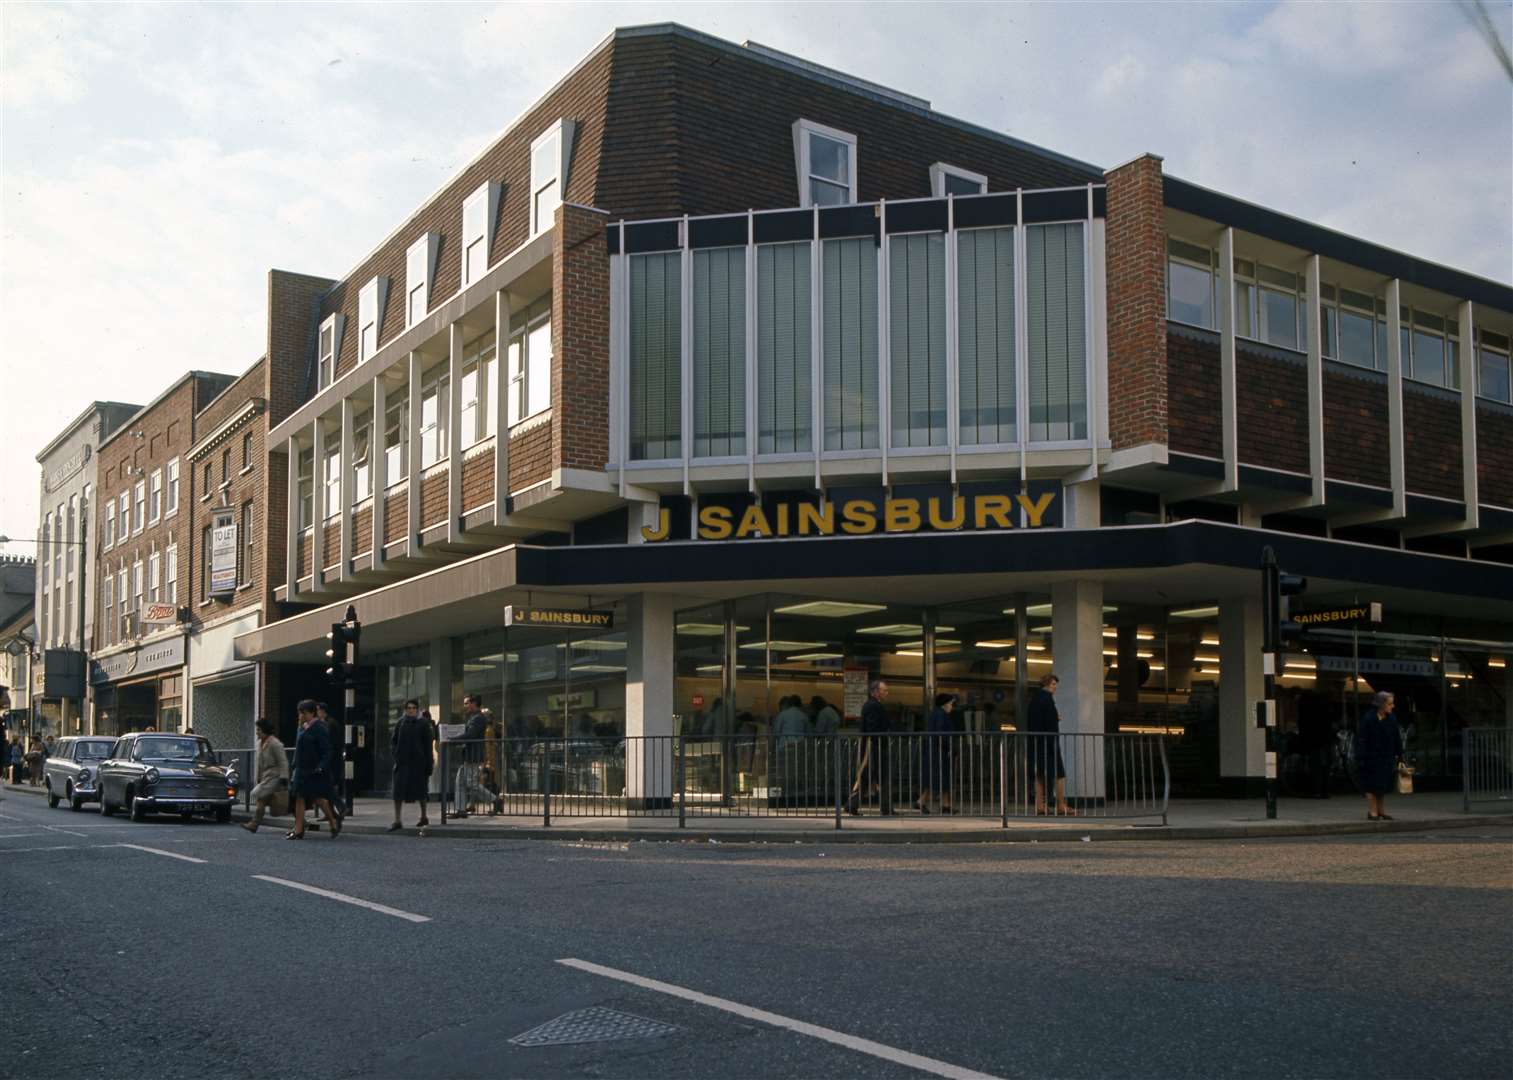 Ashford's next store was at 56 High Street - which in more recent years has been occupied by Boots. And is now part of the pedestrianised centre of the town. Picture: The Sainsbury Archive, Museum of London Docklands